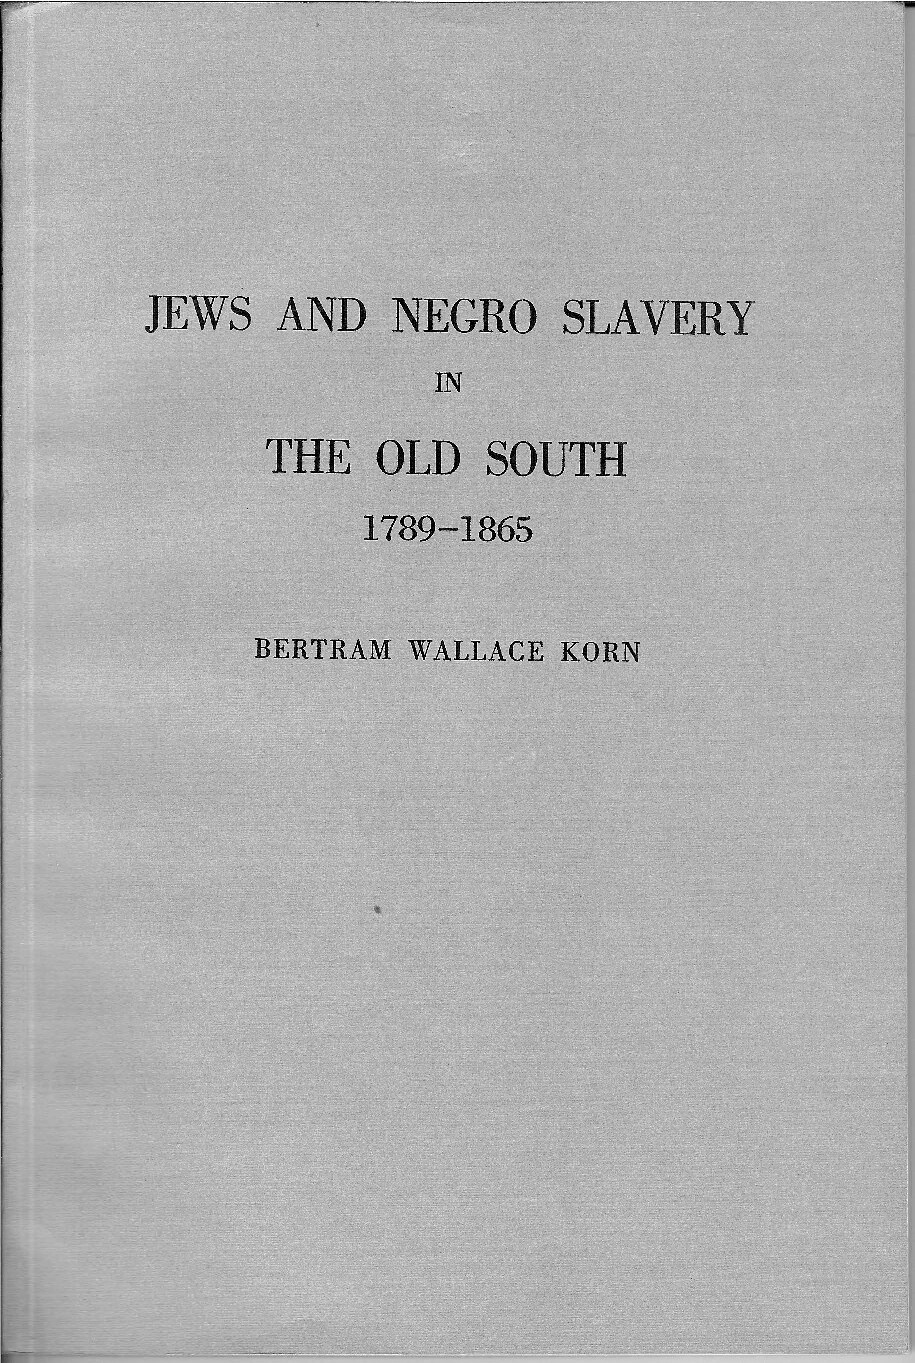 Jews and Negro Slavery in the Old South, 1789-1865